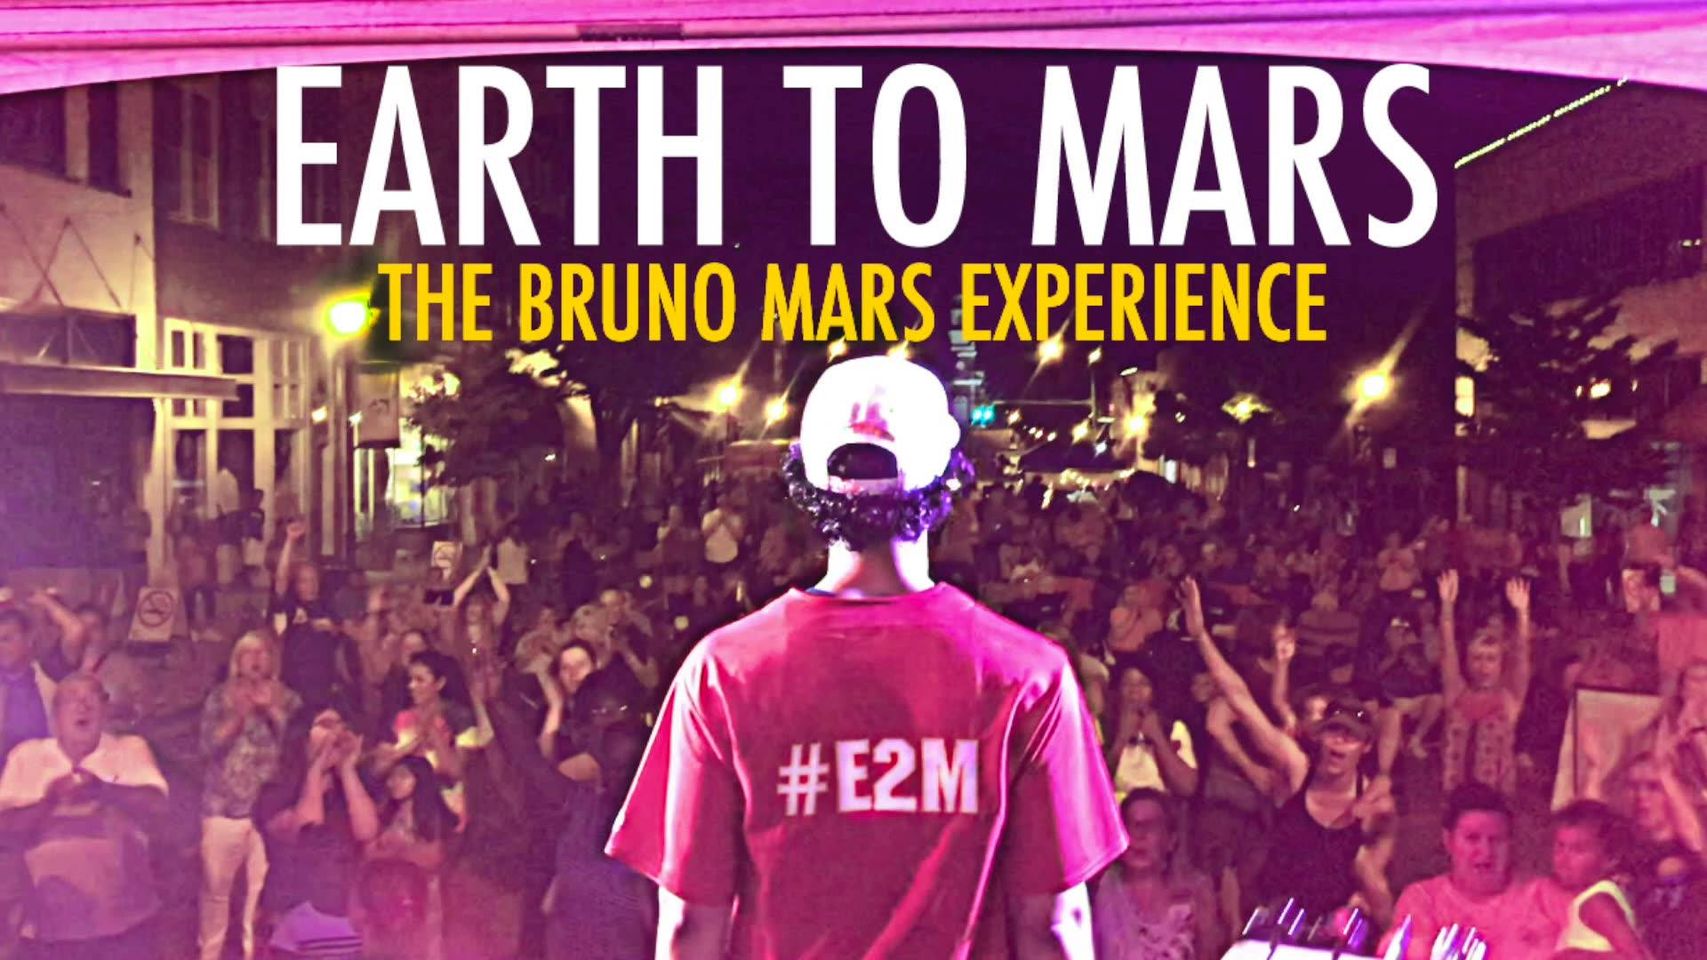 BRUNO MARS TRIBUTE with EARTH TO MARS: THE BRUNO MARS EXPERIENCE! 